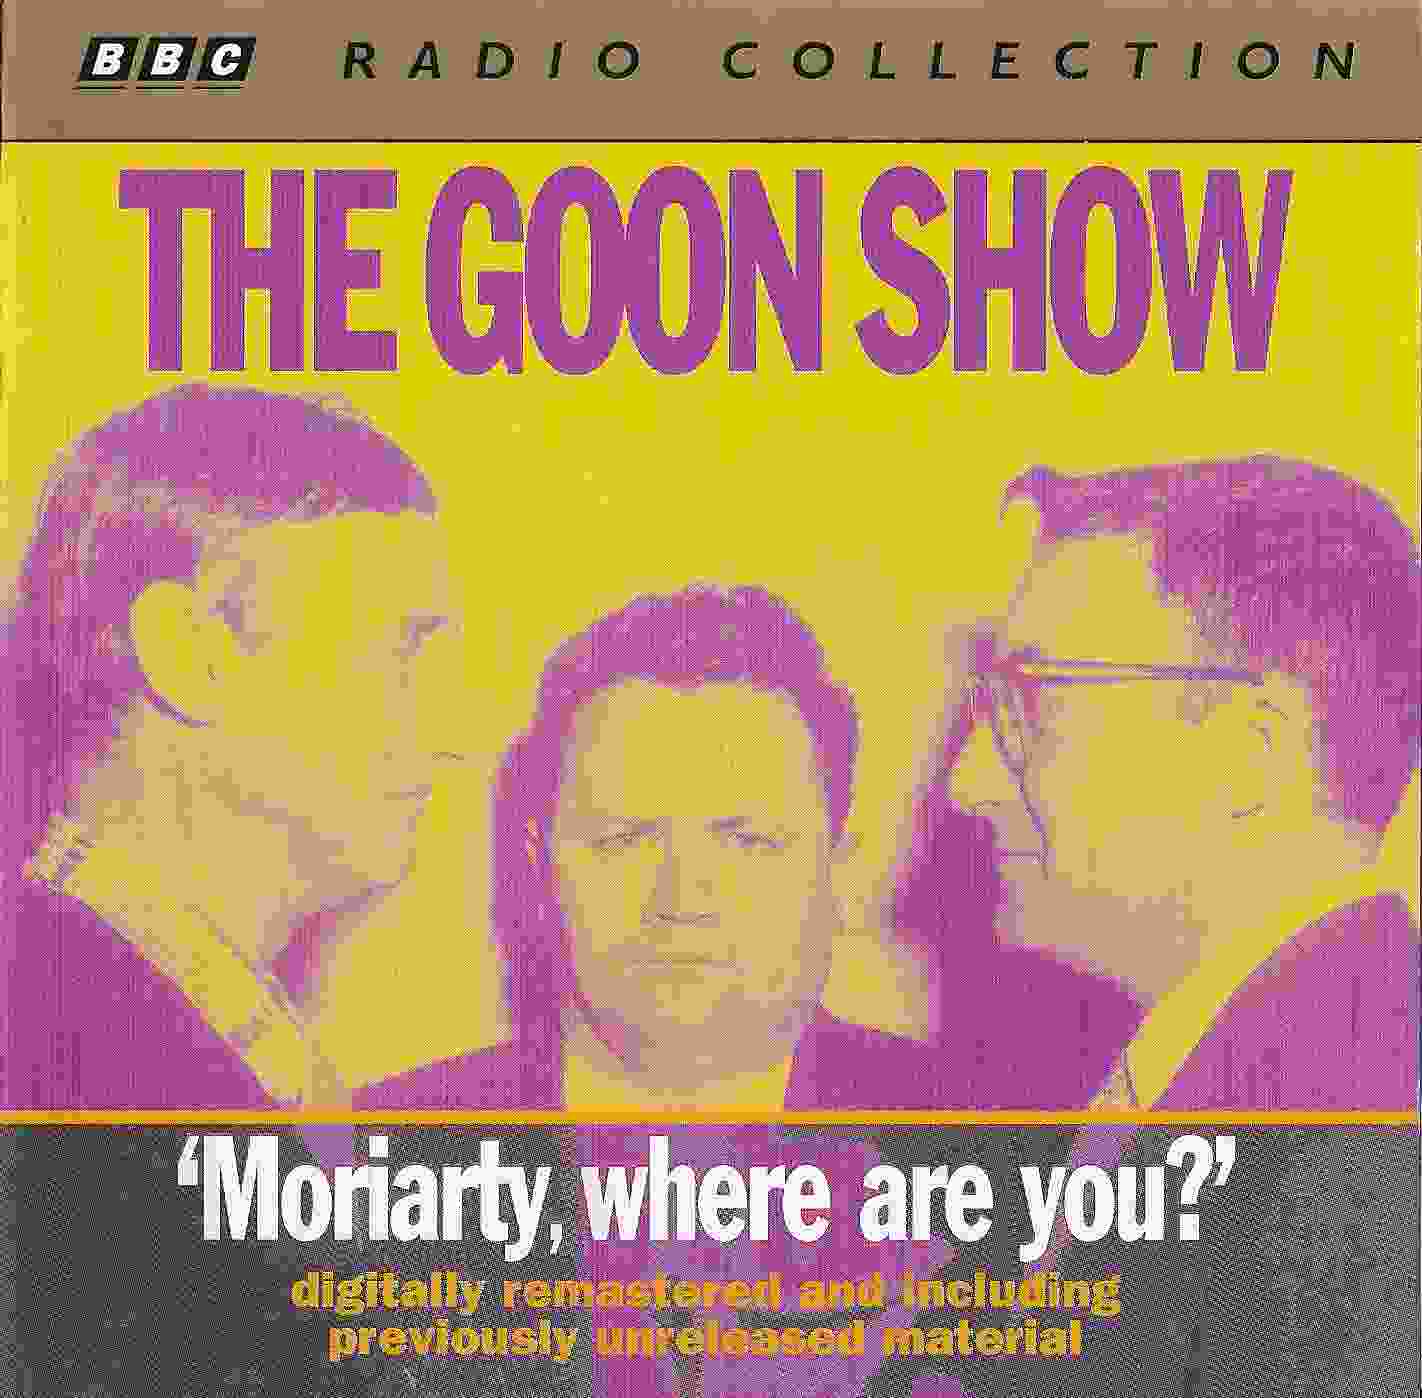 Picture of ZBBC 1864 CD The Goon show 1 - Moriarty, where are you? by artist Spike Milligan / Larry Stephens from the BBC cds - Records and Tapes library